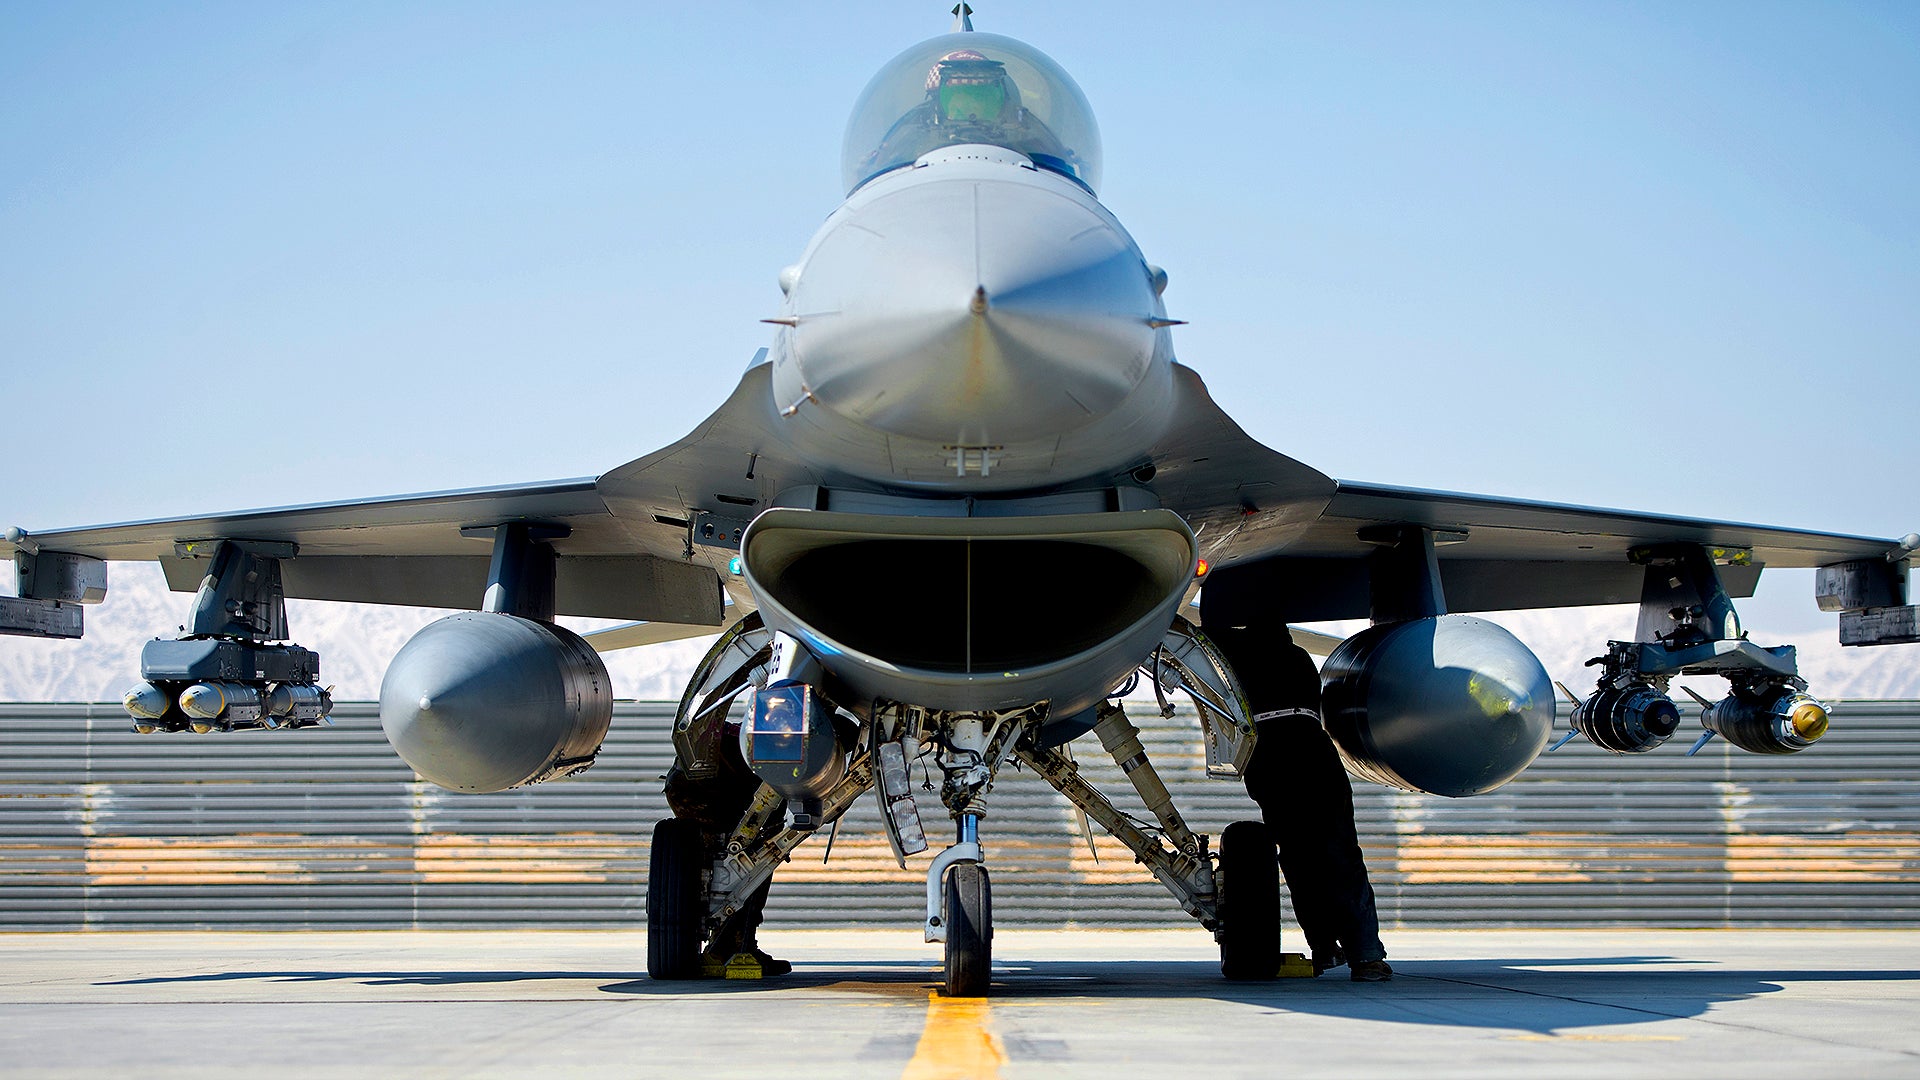 Ukraine’s F-16s Could Come With These Weapons